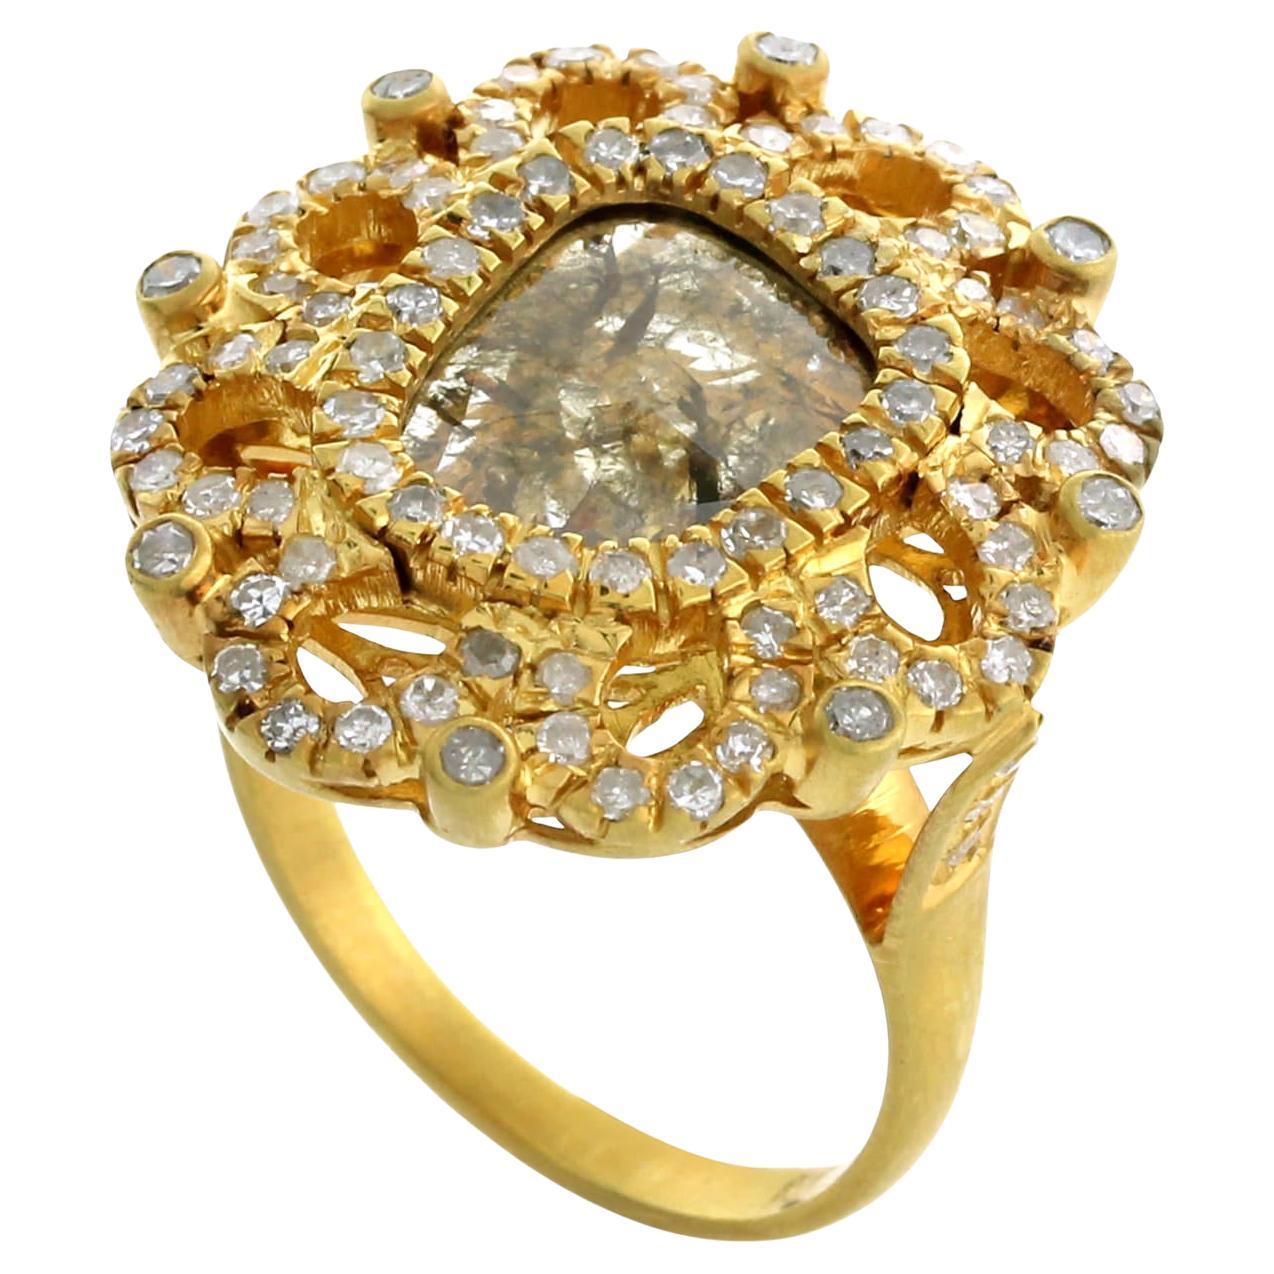 Slice Daimond Cocktail Ring With Pave Diamond Made In 18k Yellow Gold For Sale